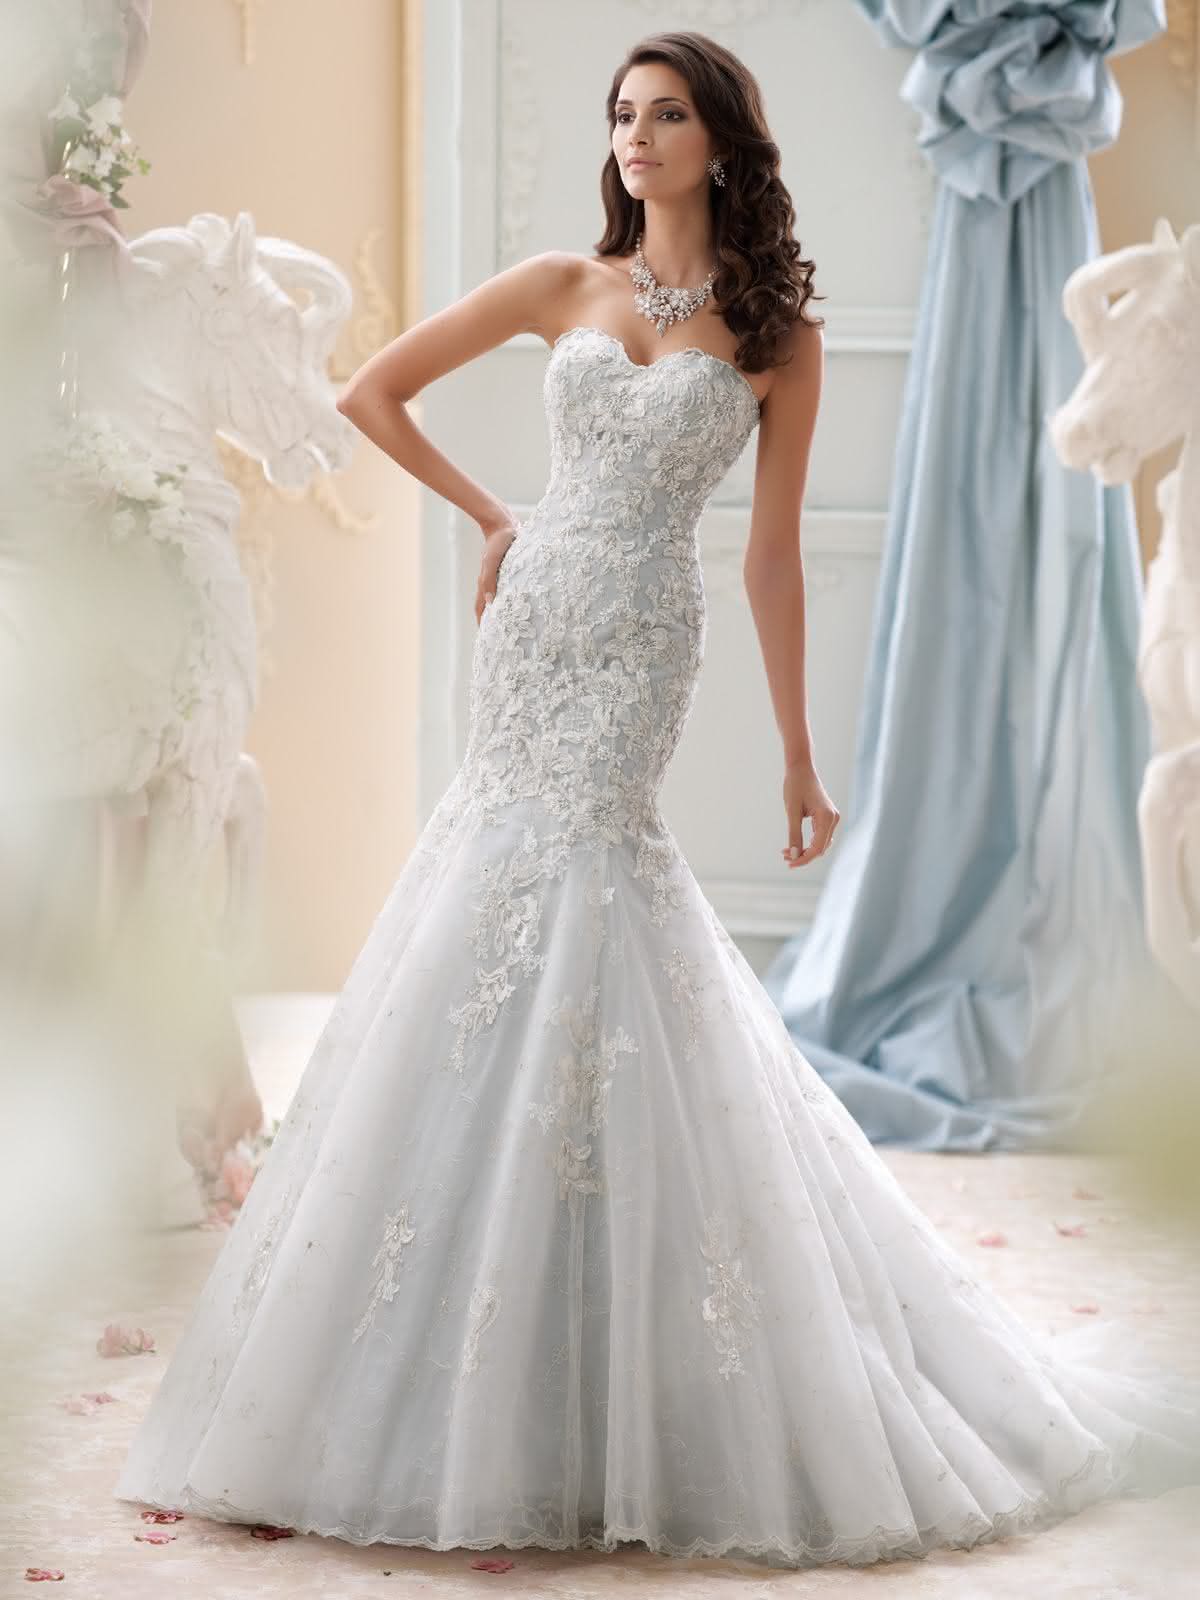 WEDDING DRESSES AND BRIDAL GOWNS turning the ordinary into extraordinary.